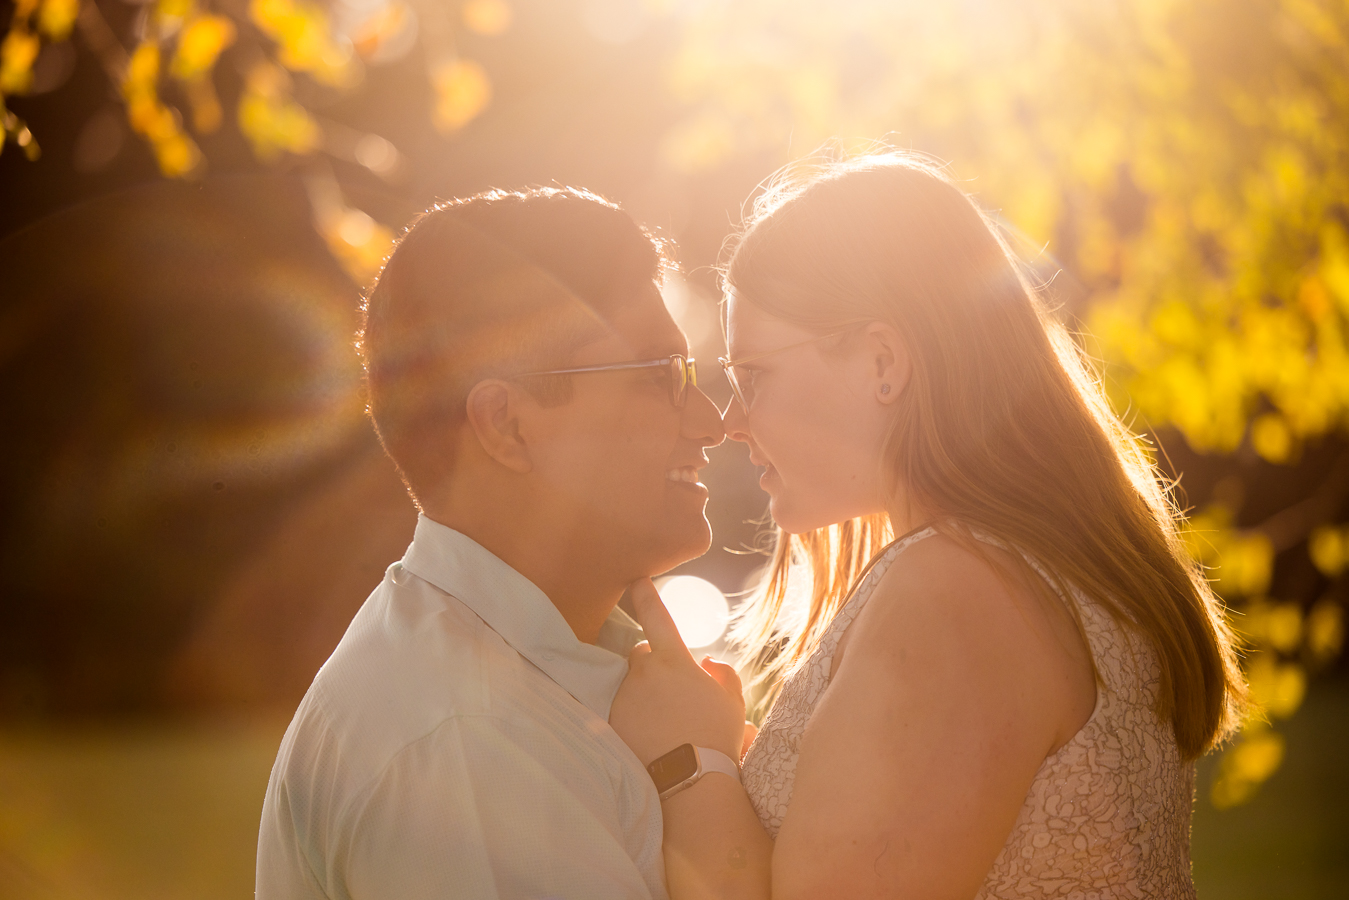 DMV wedding photographer, rhinehart photography, captures this sun lit image of the couple as they stand facing each other and smiling as their noses touch during their intimate wedding ceremony in spencerville maryland